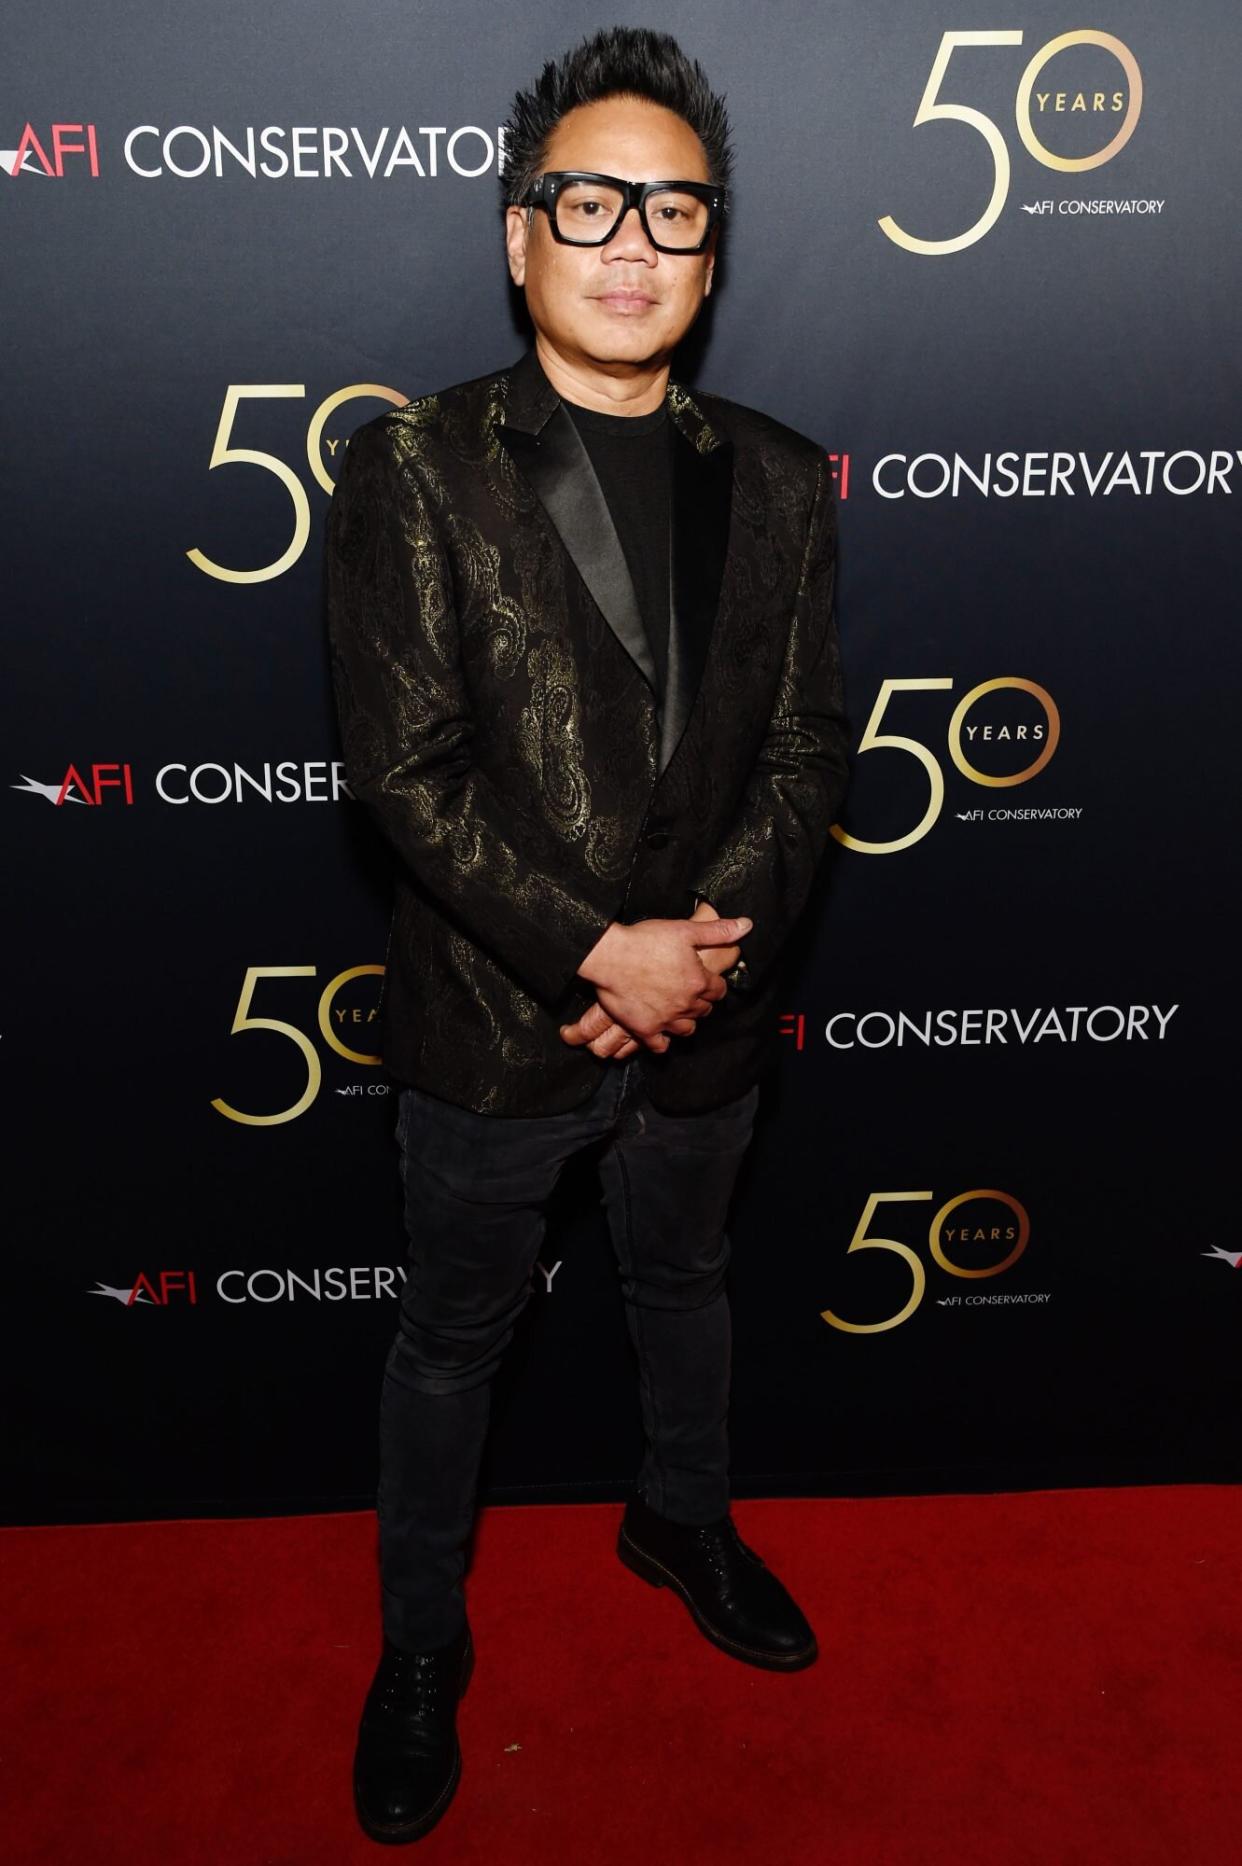 BEVERLY HILLS, CALIFORNIA - SEPTEMBER 19: Matthew Libatique attends AFI Conservatory's 50th Anniversary Celebration at Greystone Mansion on September 19, 2019 in Beverly Hills, California. (Photo by Michael Kovac/FilmMagic for AFI)